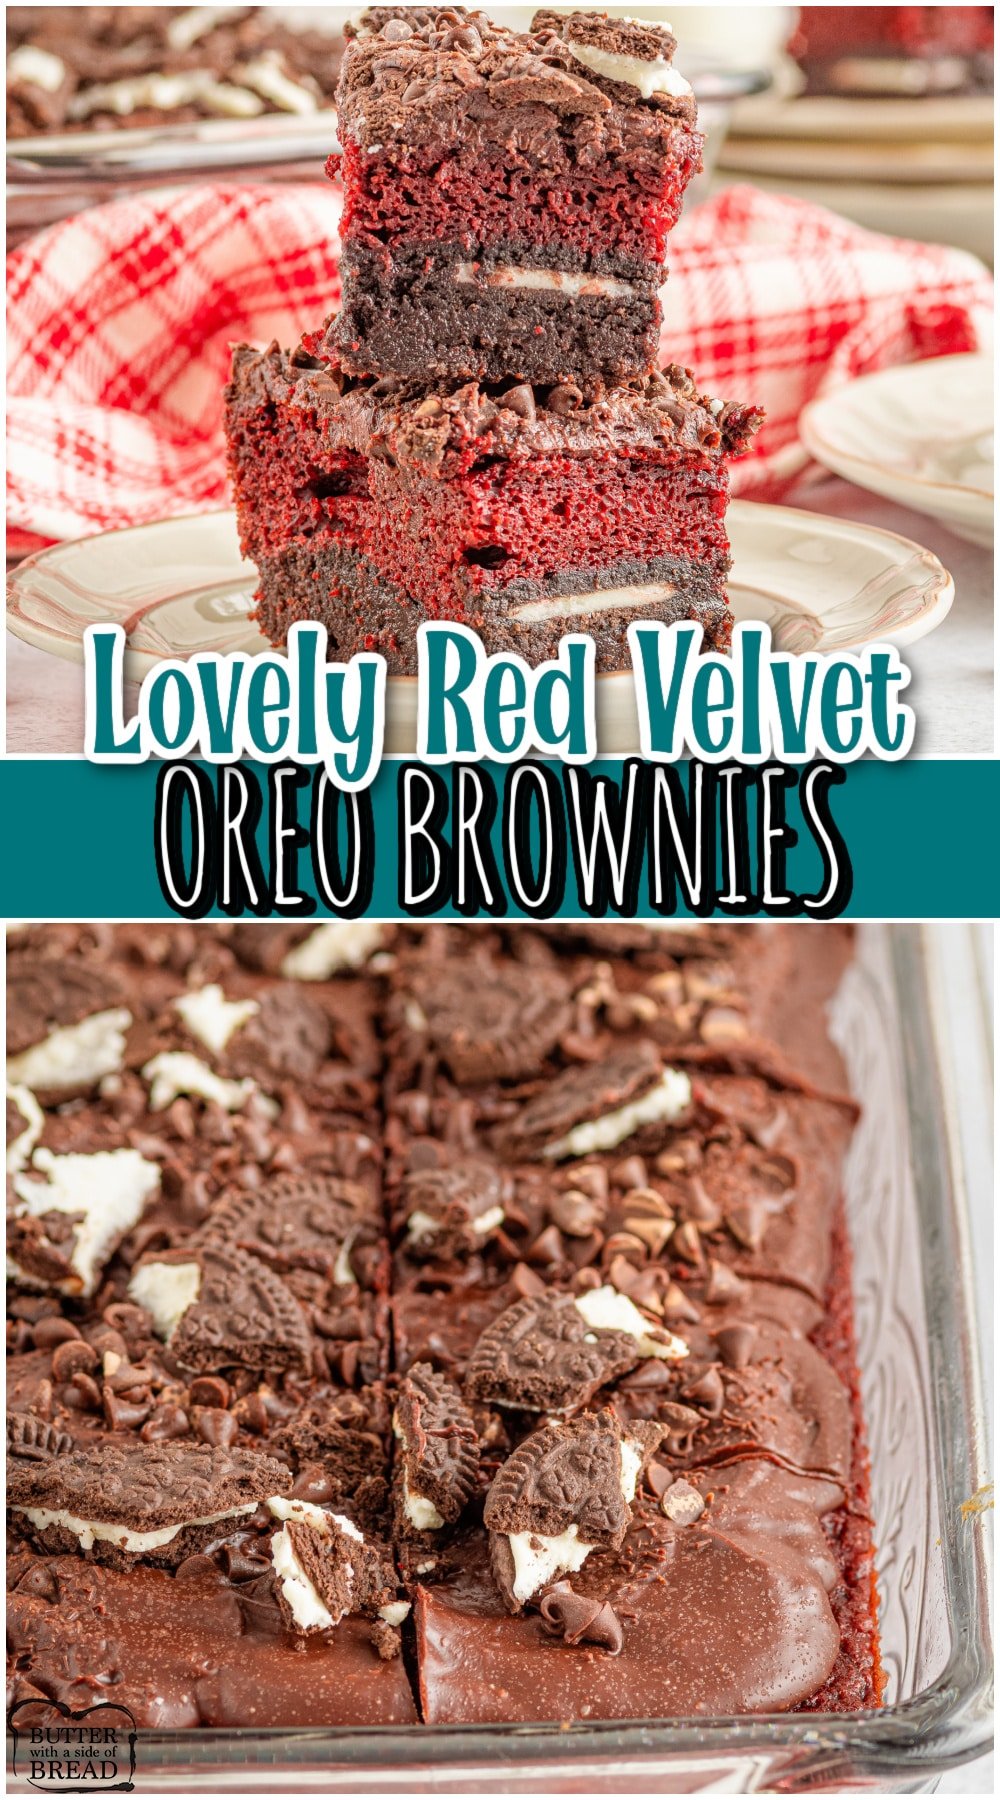 Oreo Red Velvet Brownies are made with a chocolate brownie base, red velvet cake on top & Oreo cookies in between! An incredible Red Velvet Oreo Brownie mashup!